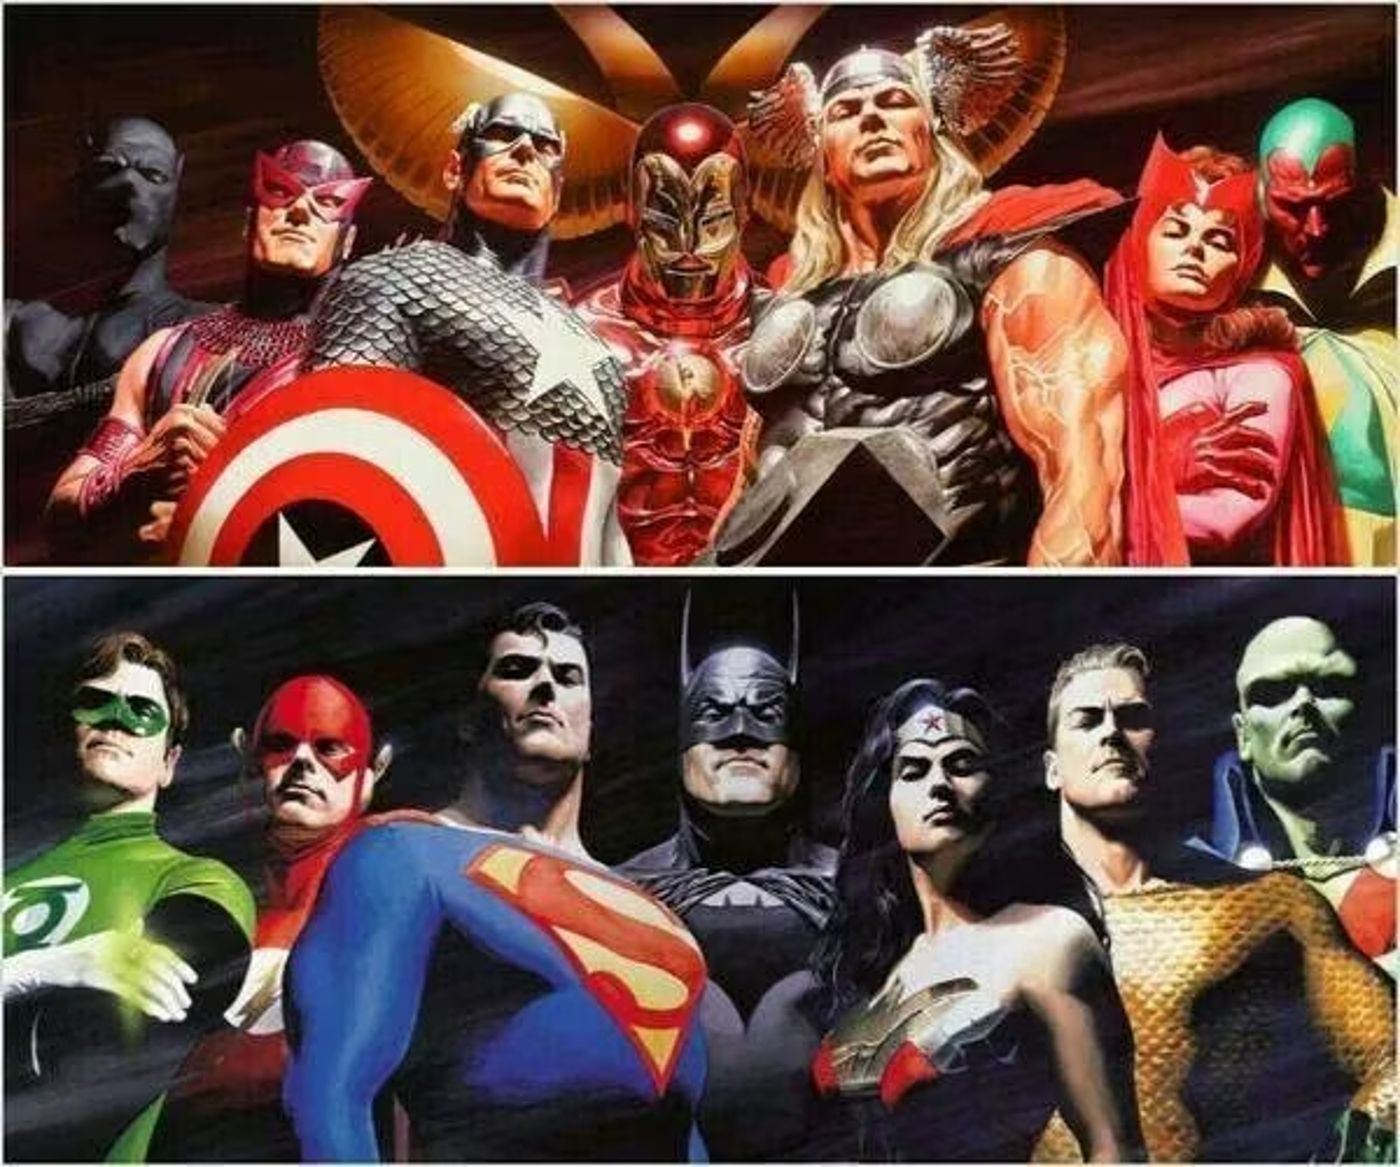 “DC Never Had Marvel’s Coherence”: The Big Difference Between Marvel & DC (According to Superstar Writer Grant Morrison)